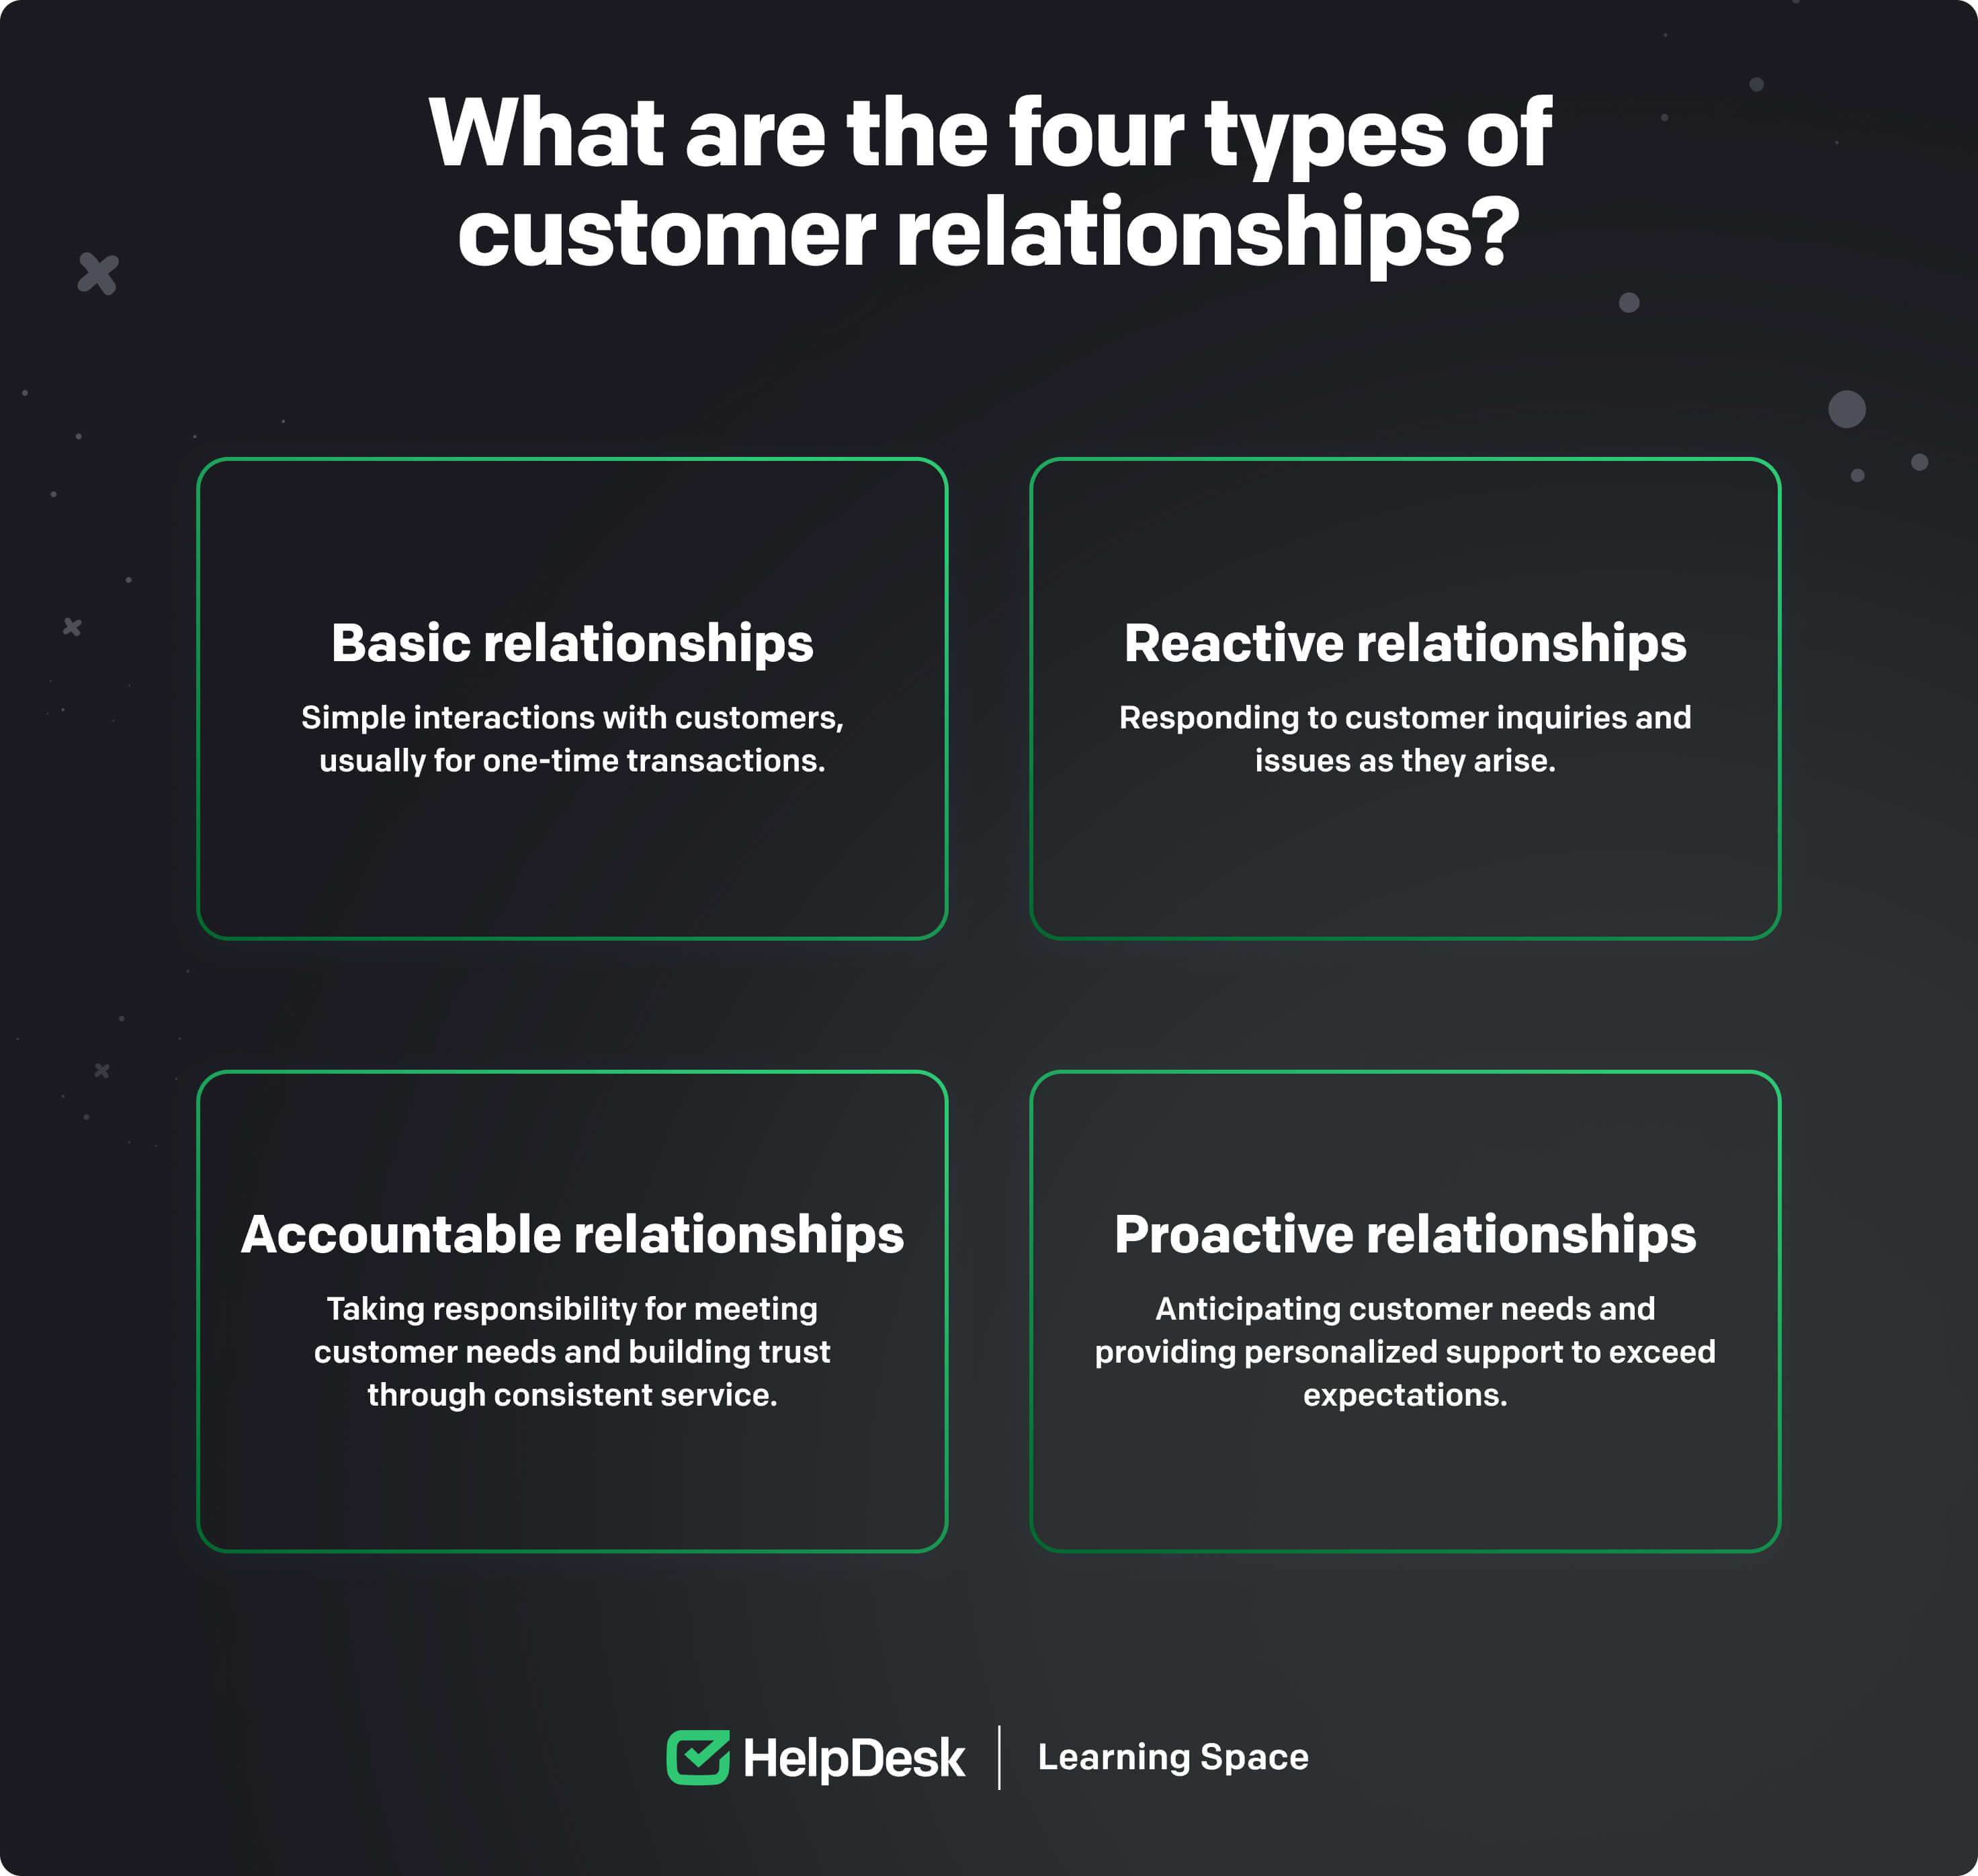 The four main types of customer relationships